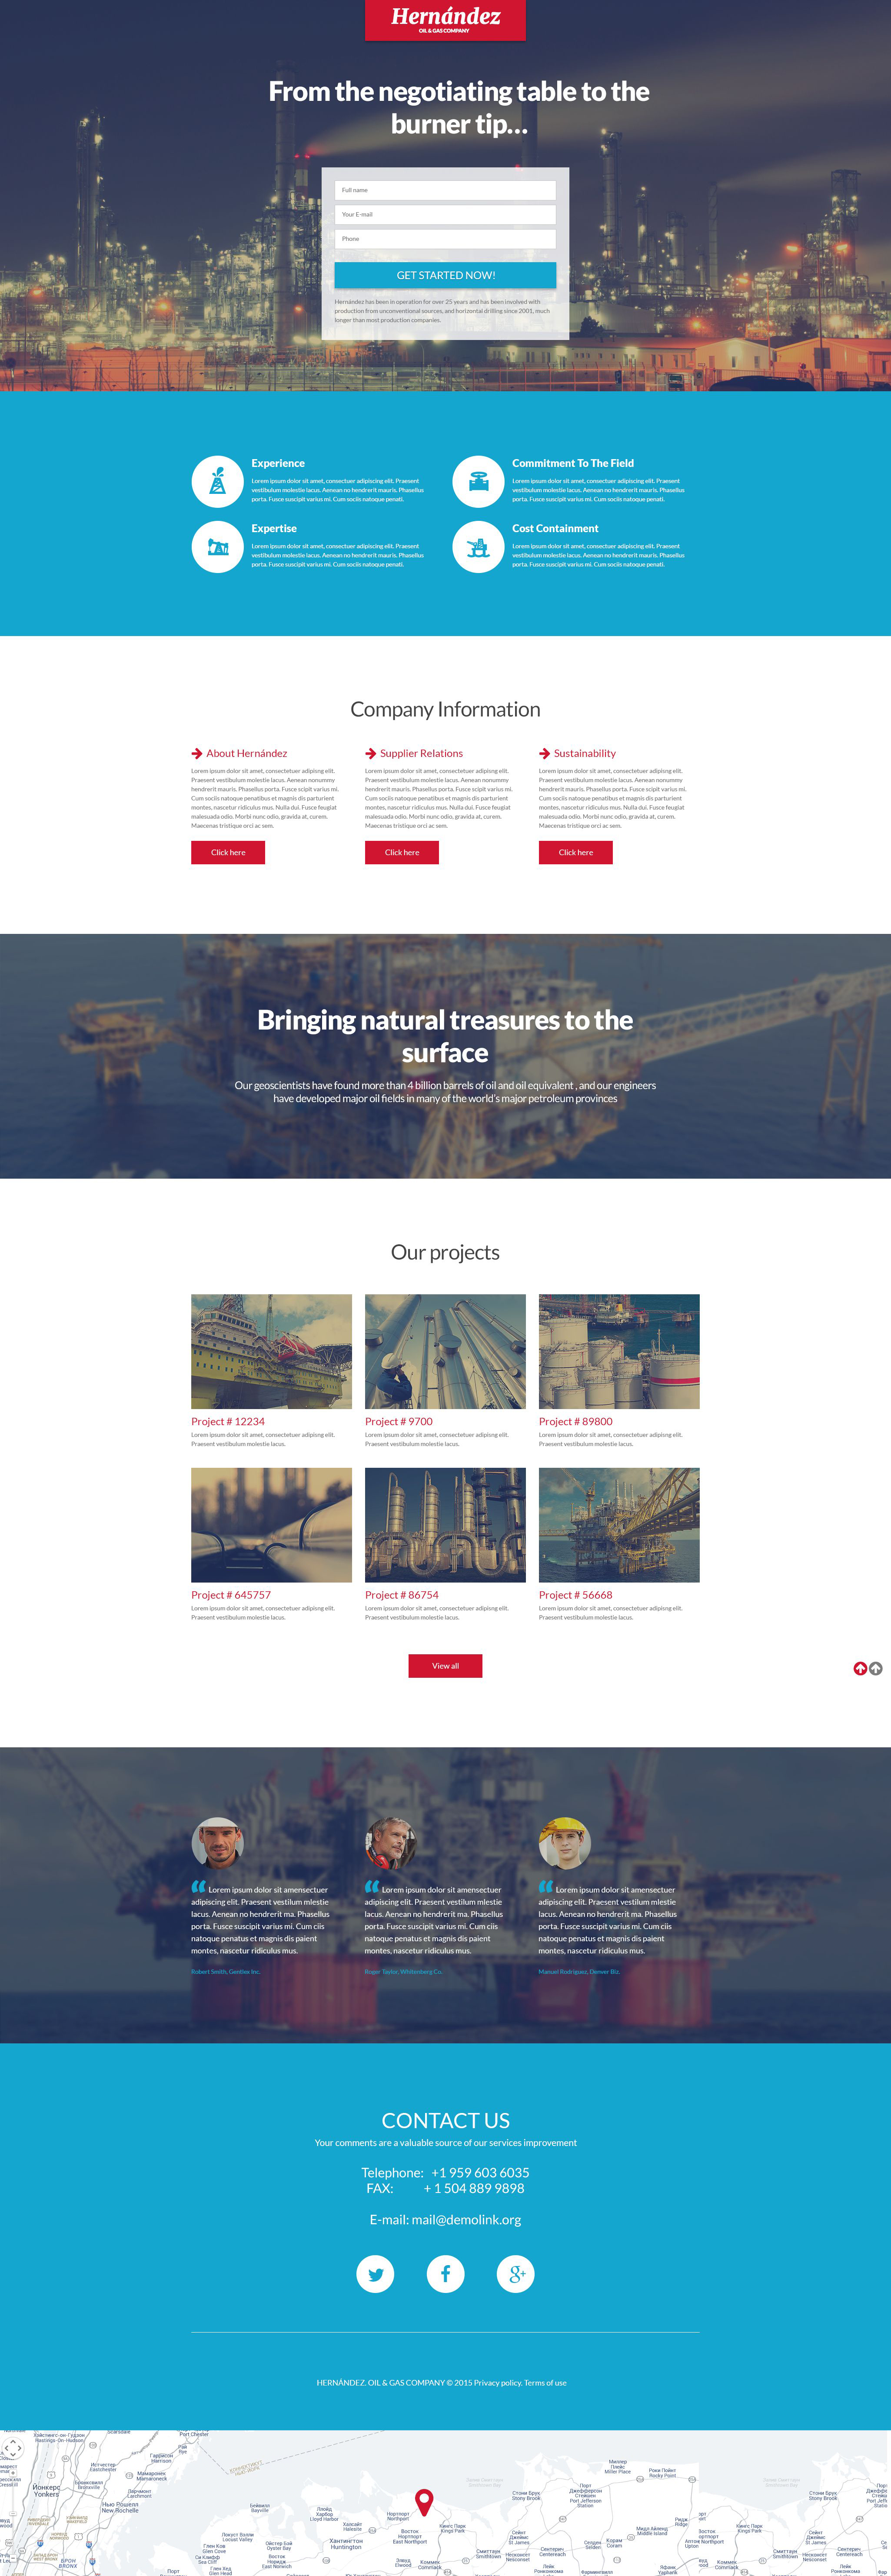 Gas & Oil Responsive Landing Page Template